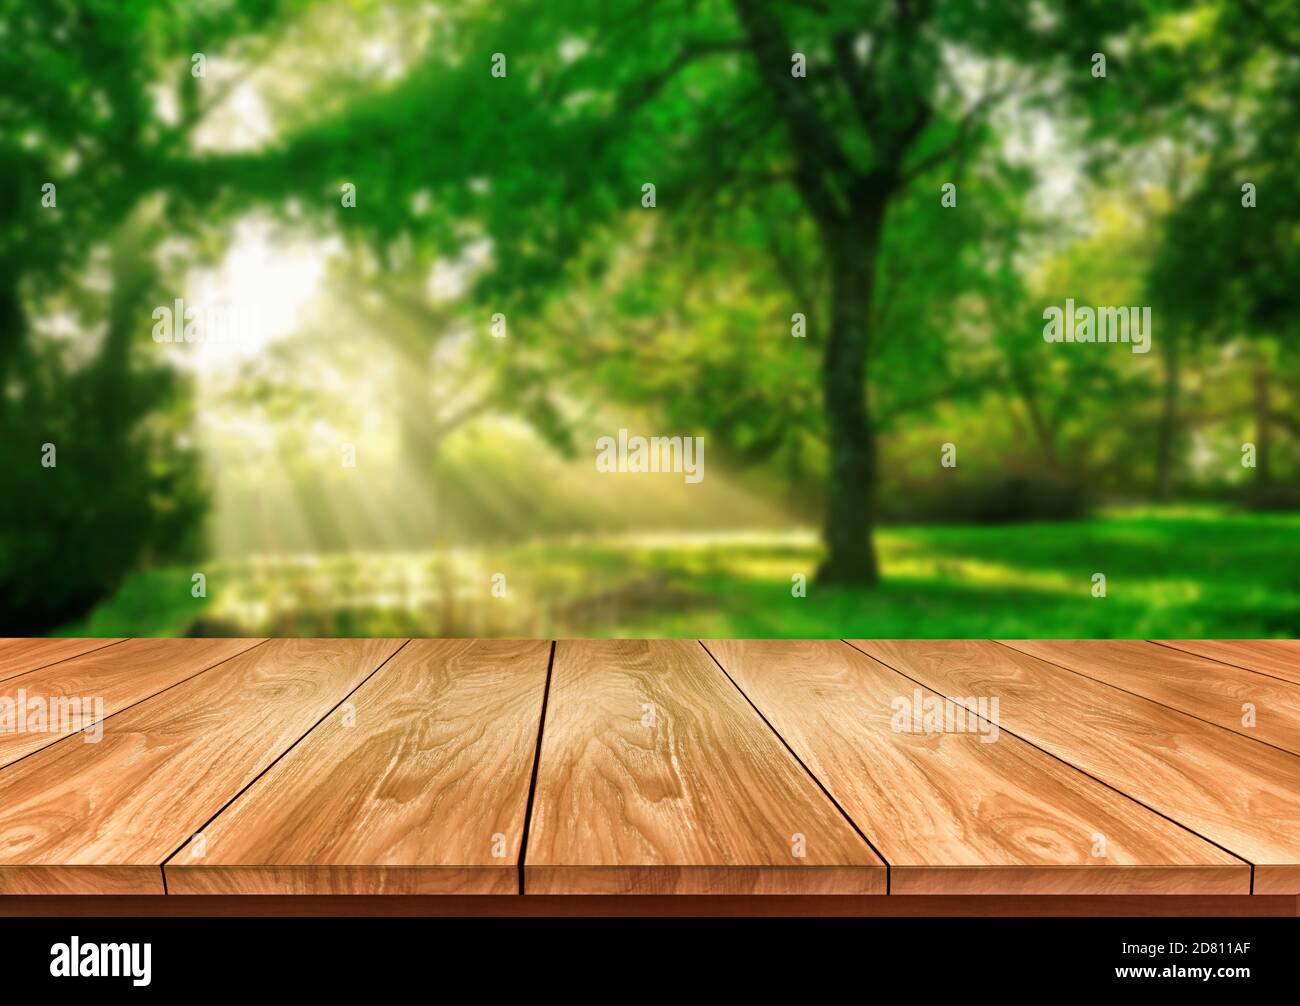 Brown wood table in green blur nature background of trees and grass in the park with empty copy space on the table for product display mockup. Fresh Stock Photo